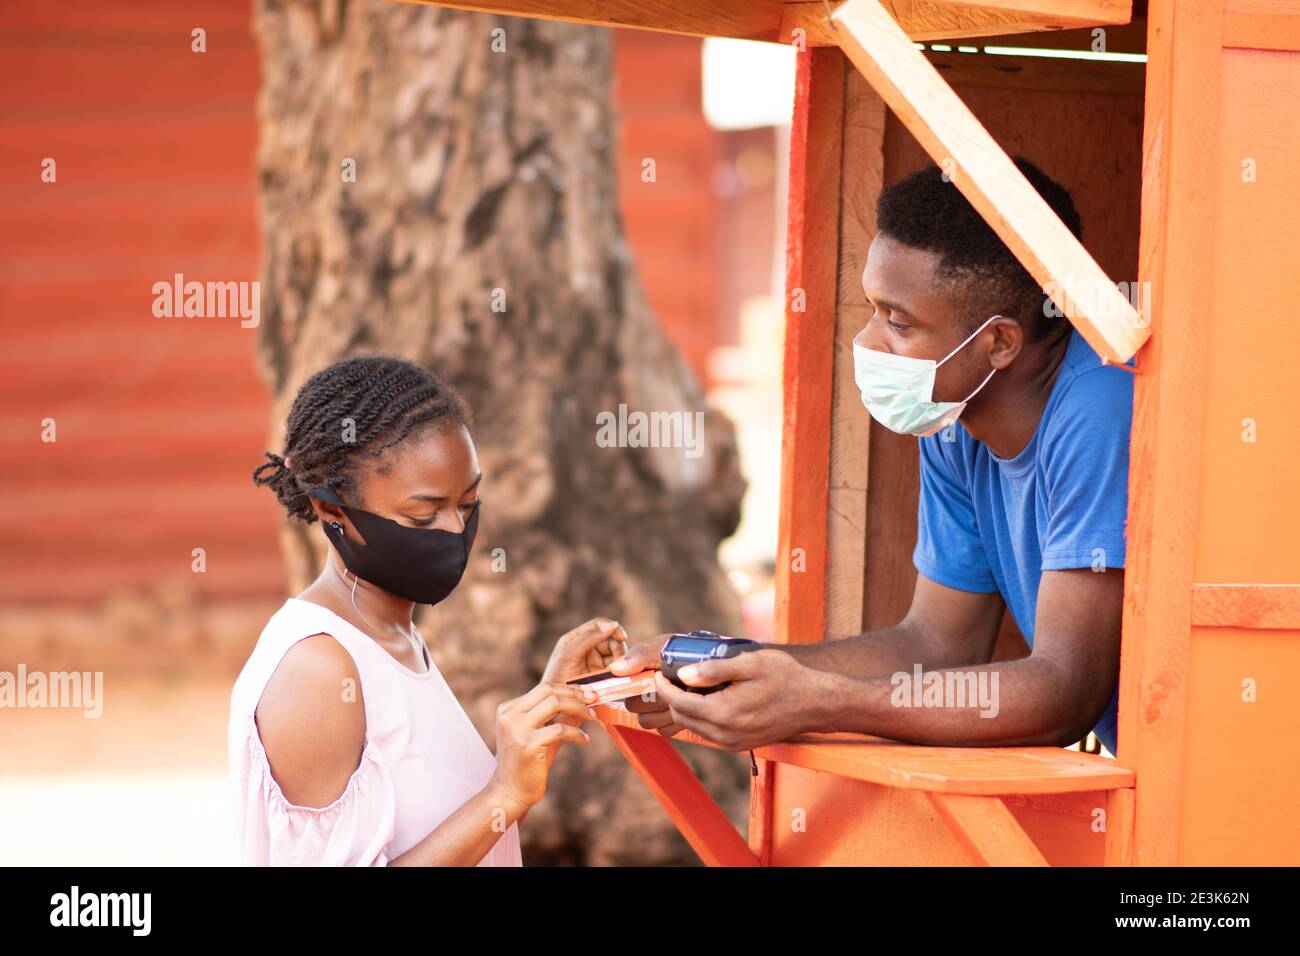 young nigerian woman at a pos service kiosk wanting to withdraw cash, wearing a face mask Stock Photo